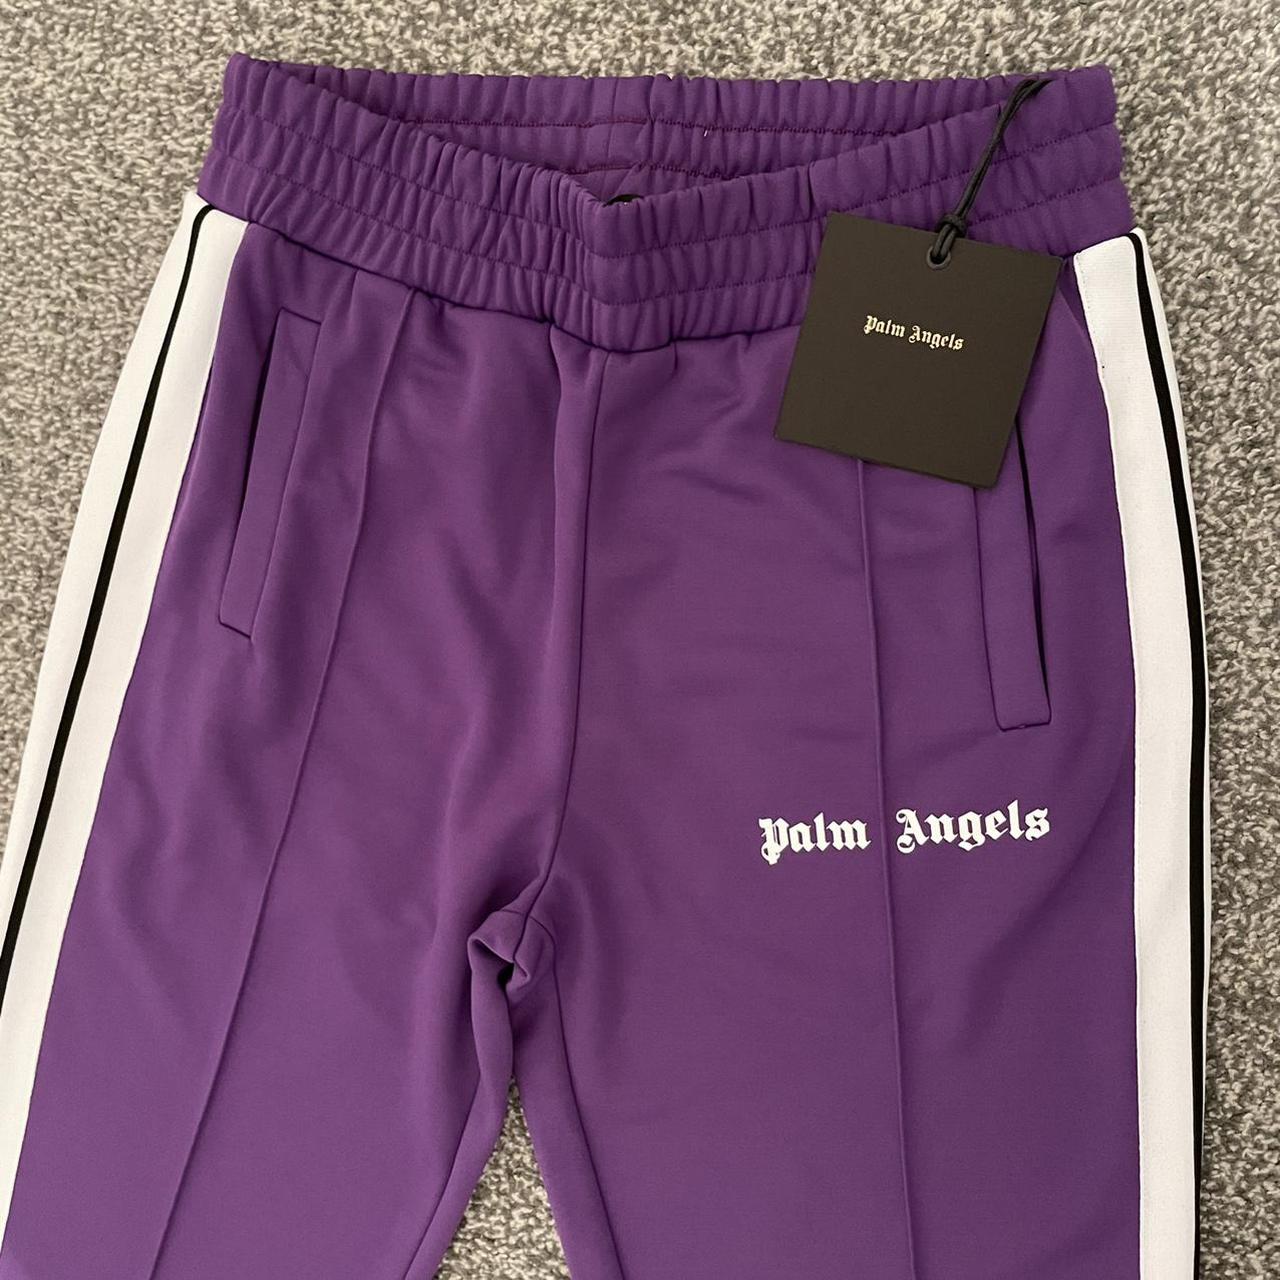 Product Image 2 - Palm Angels track pants in